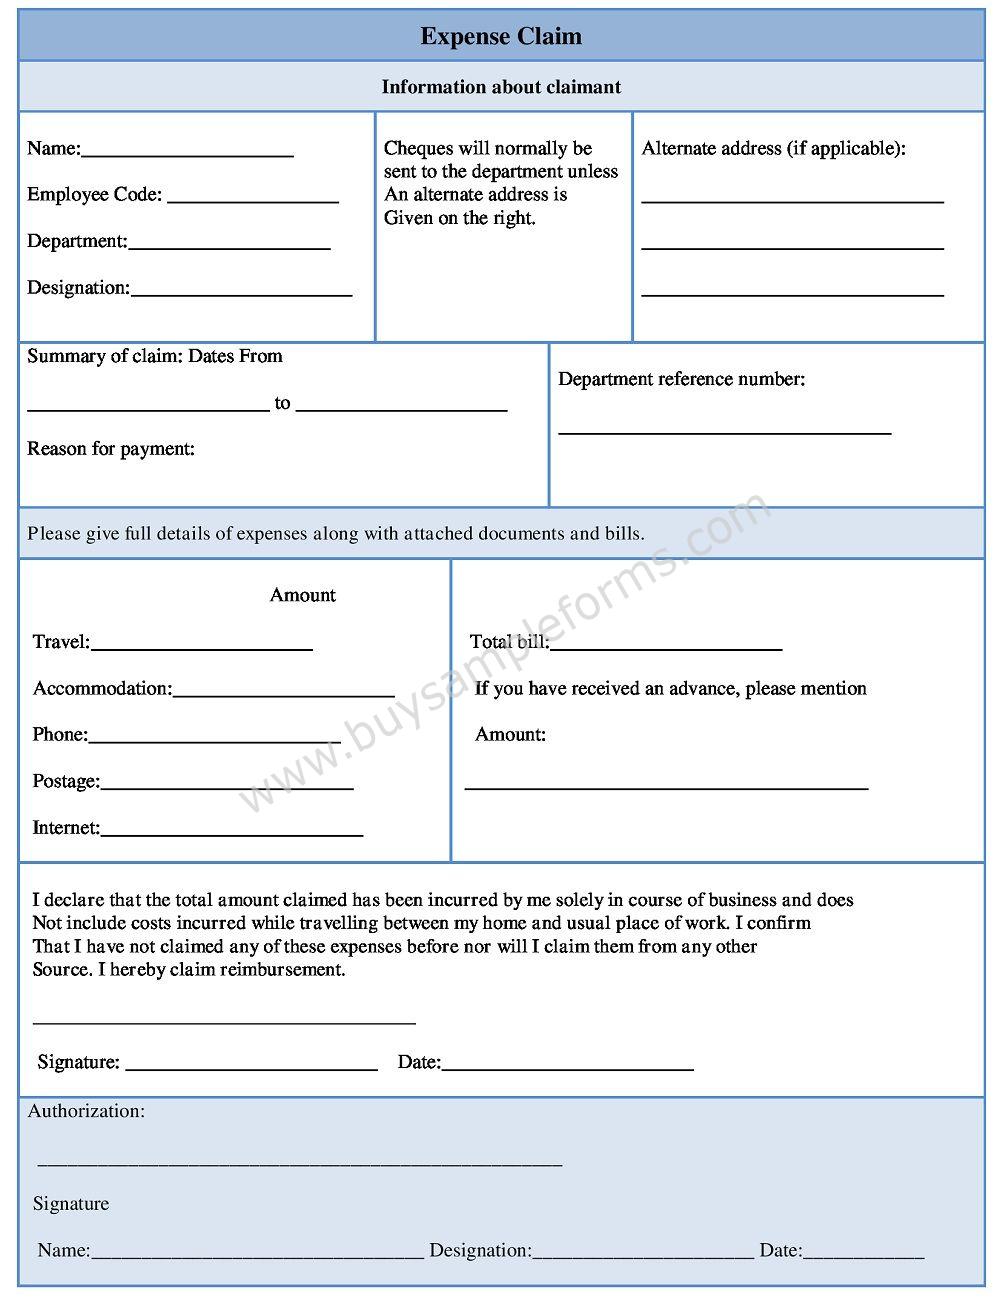 Expense Claim Form - Expense Form Template for Small Business